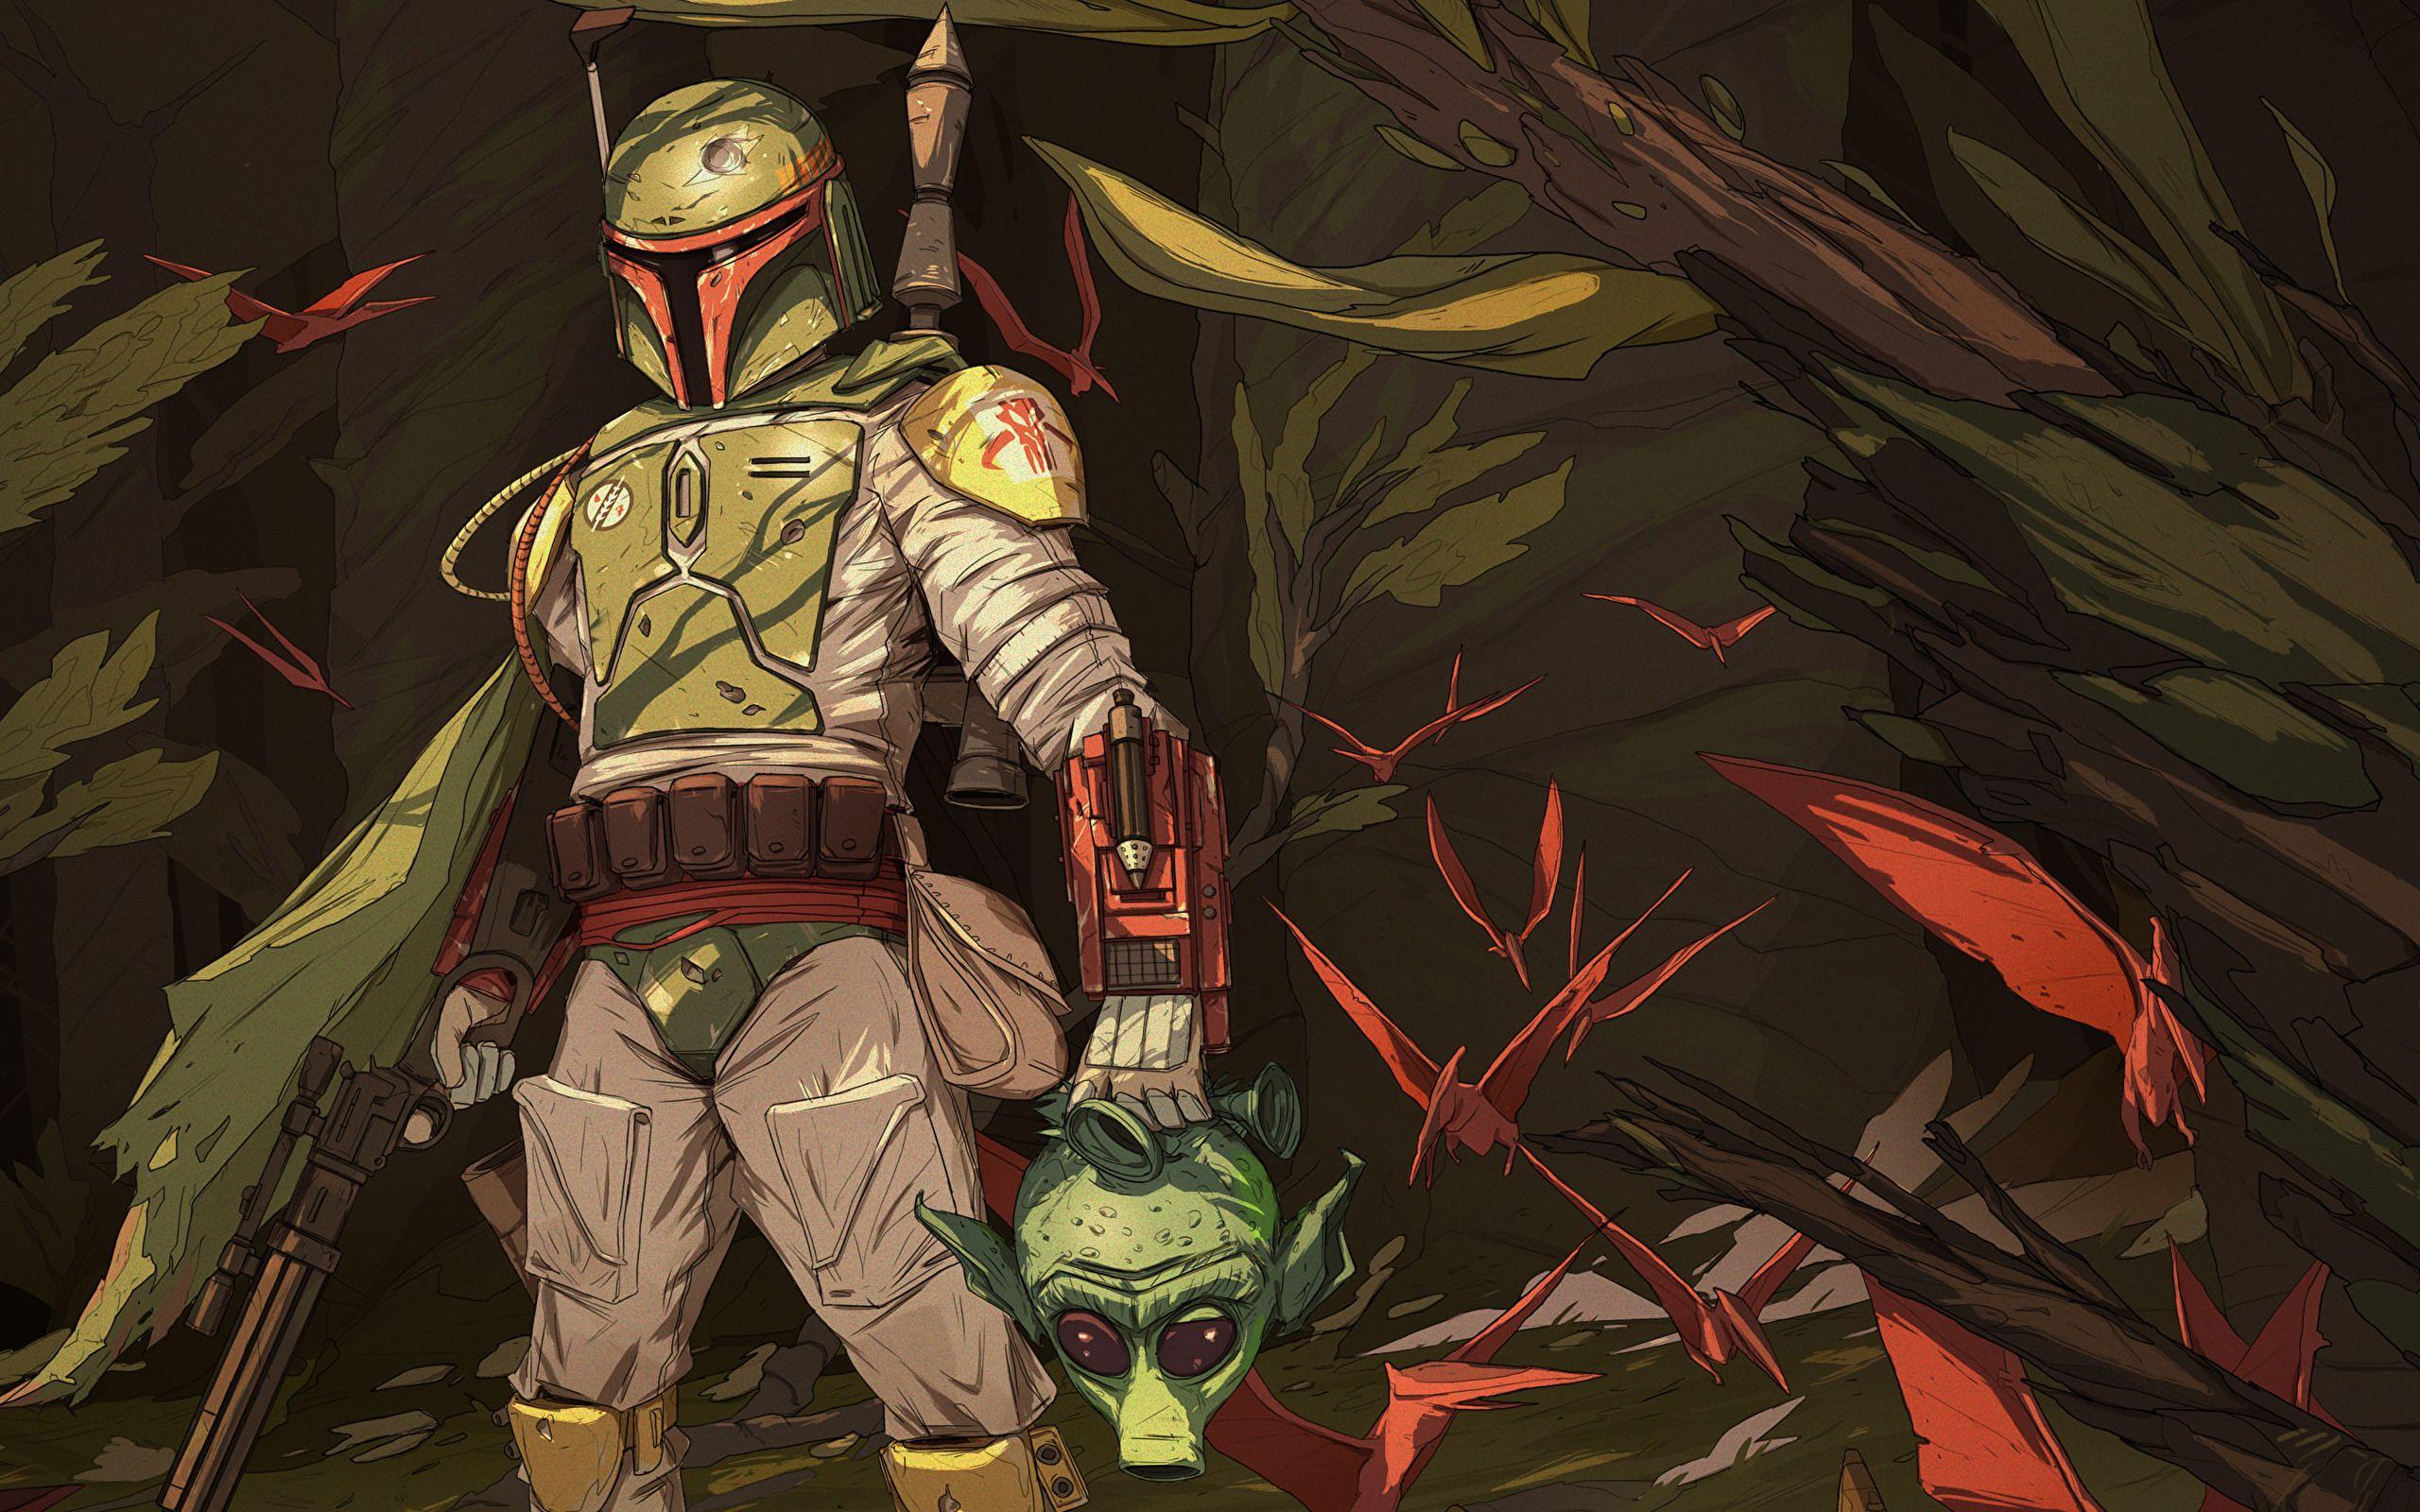 Star Wars TV series The Mandalorian has finished filming